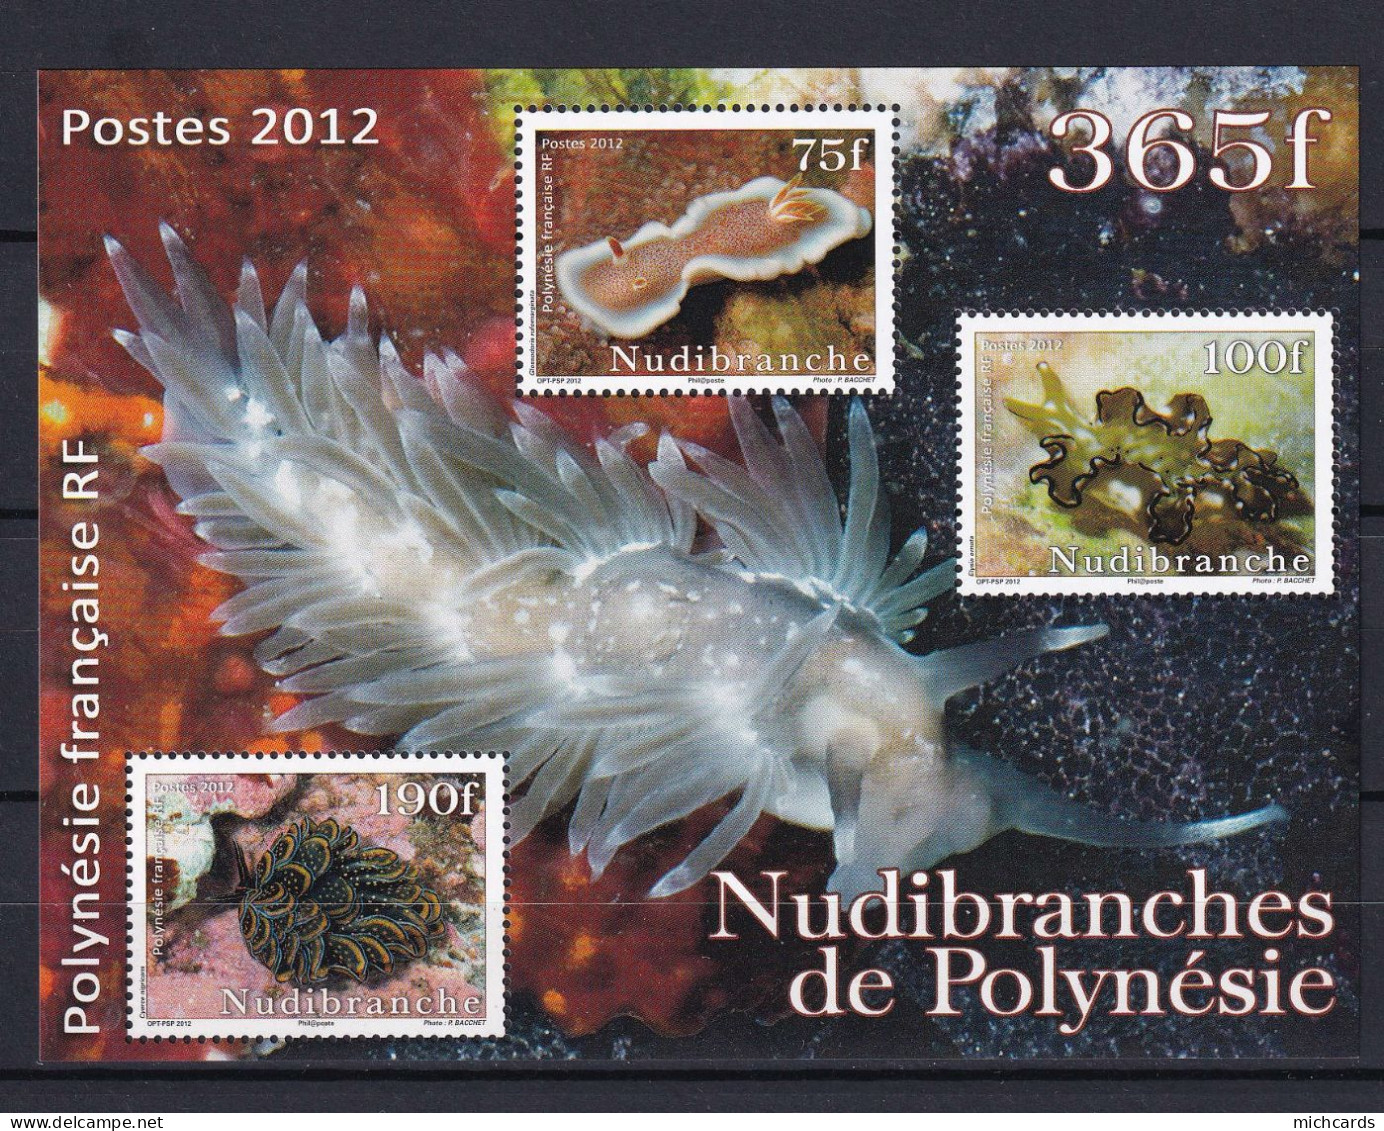 191 POLYNESIE 2012 - Y&T BF 38 - Faune Marine Nudibranche - Neuf ** (MNH) Sans Charniere - Unused Stamps